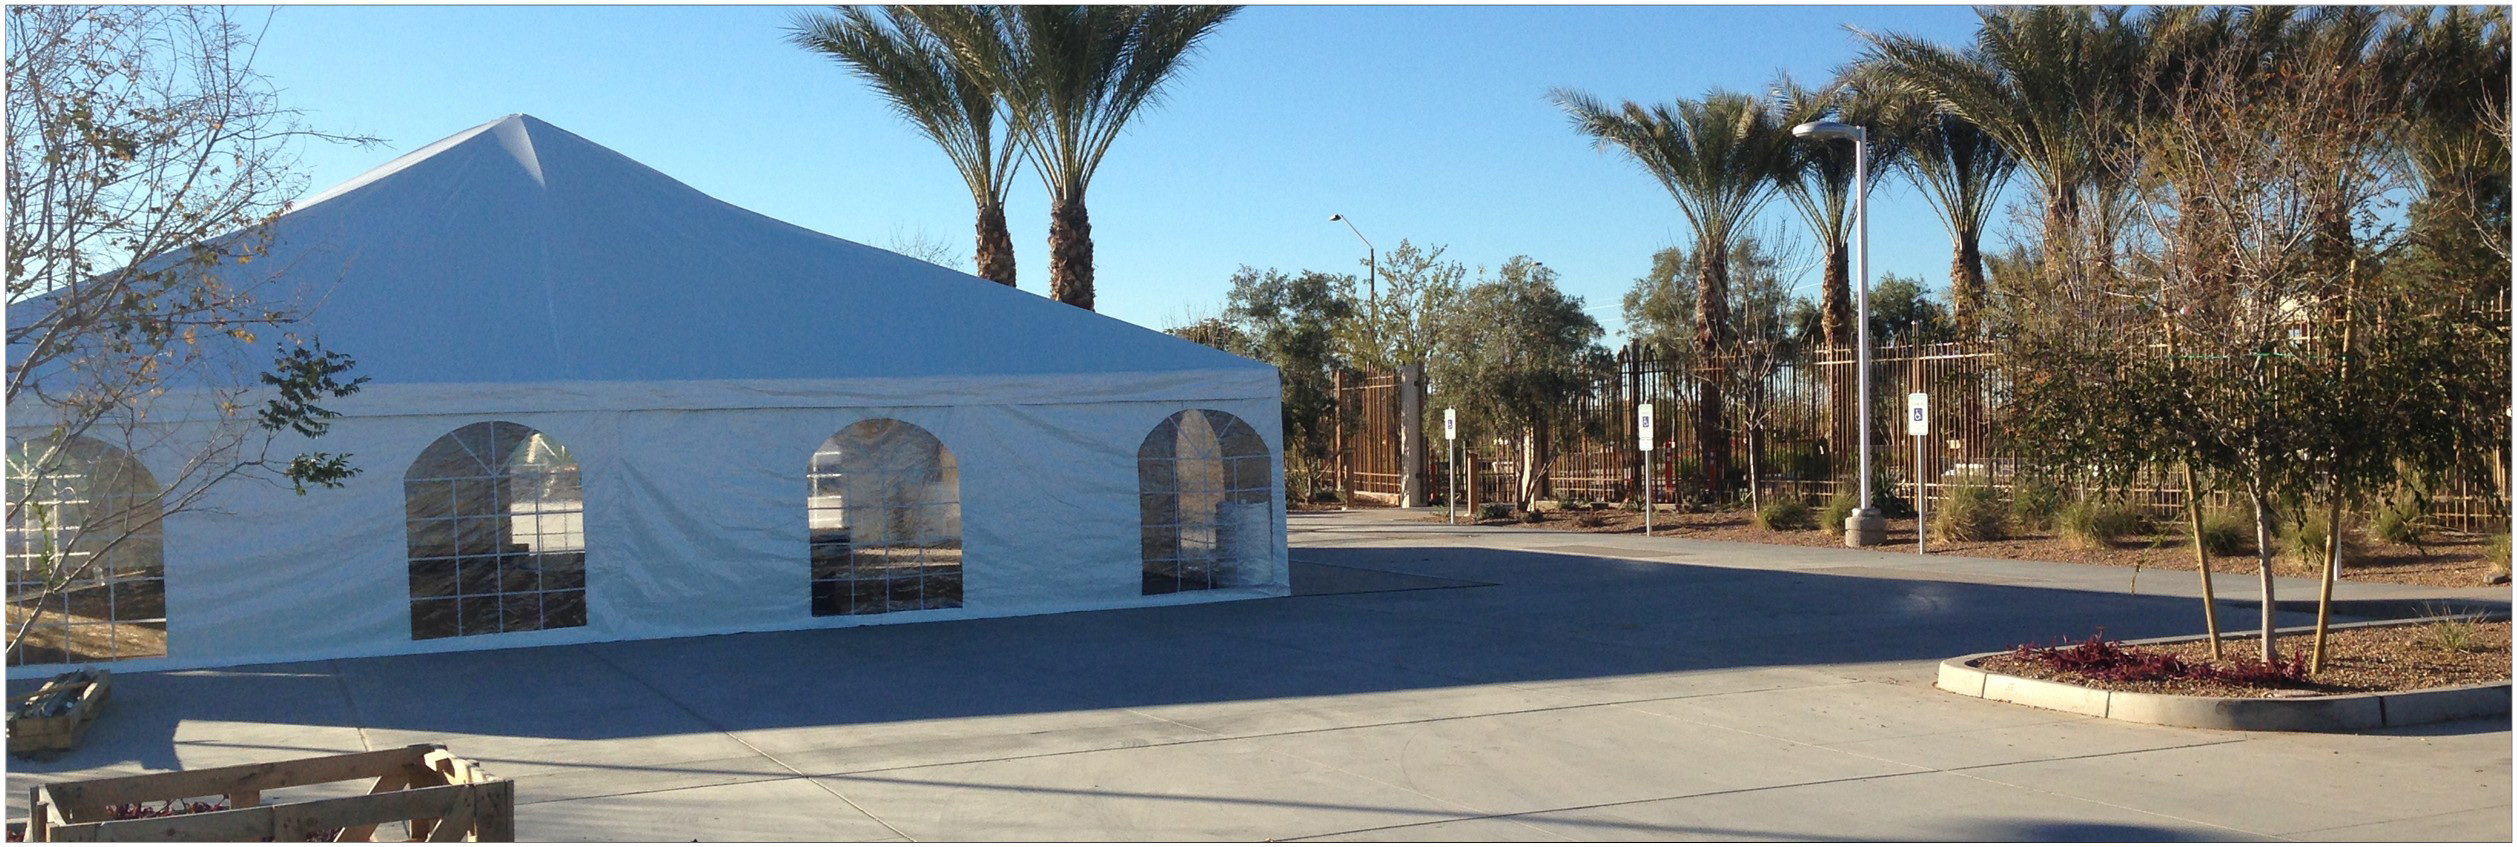 Frame type party tents